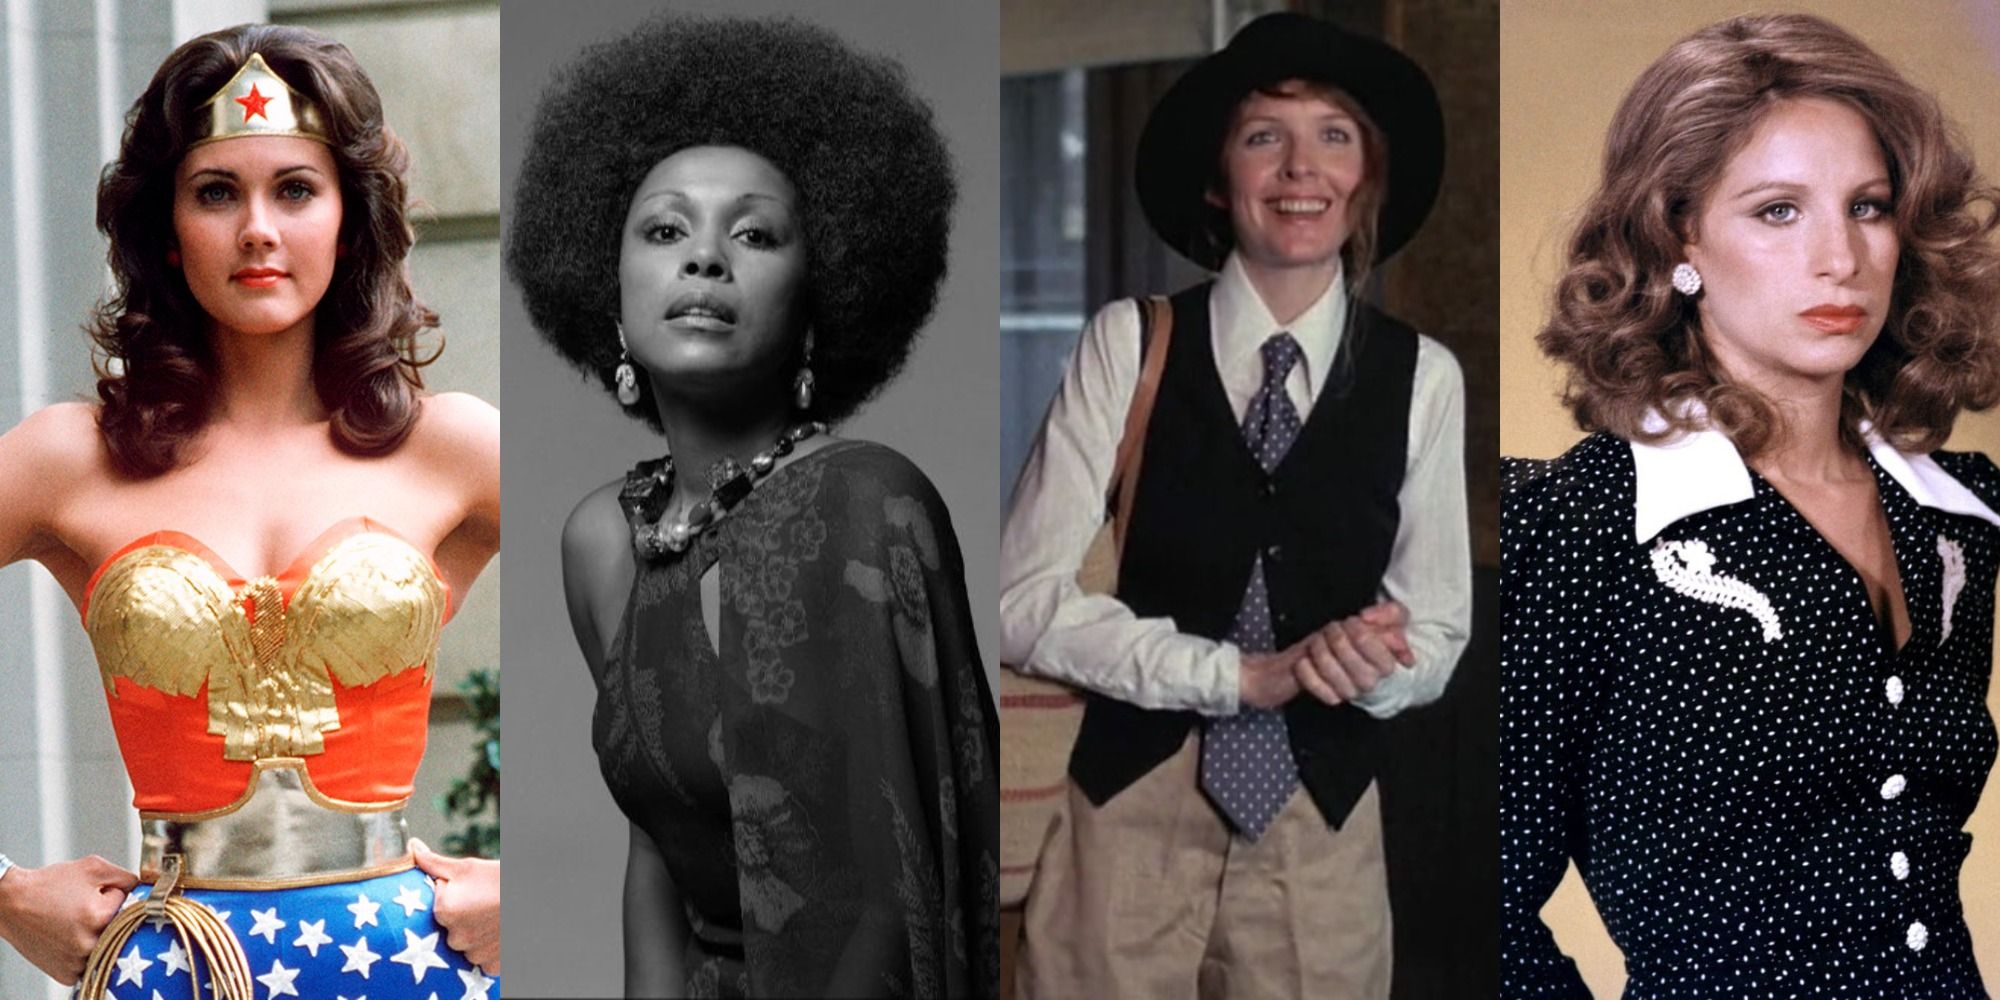 Split image with four icnonic actresses of the 70s: Lynda Carter, Diahann Carrol, Diane Keaton, and Barbra Streisand